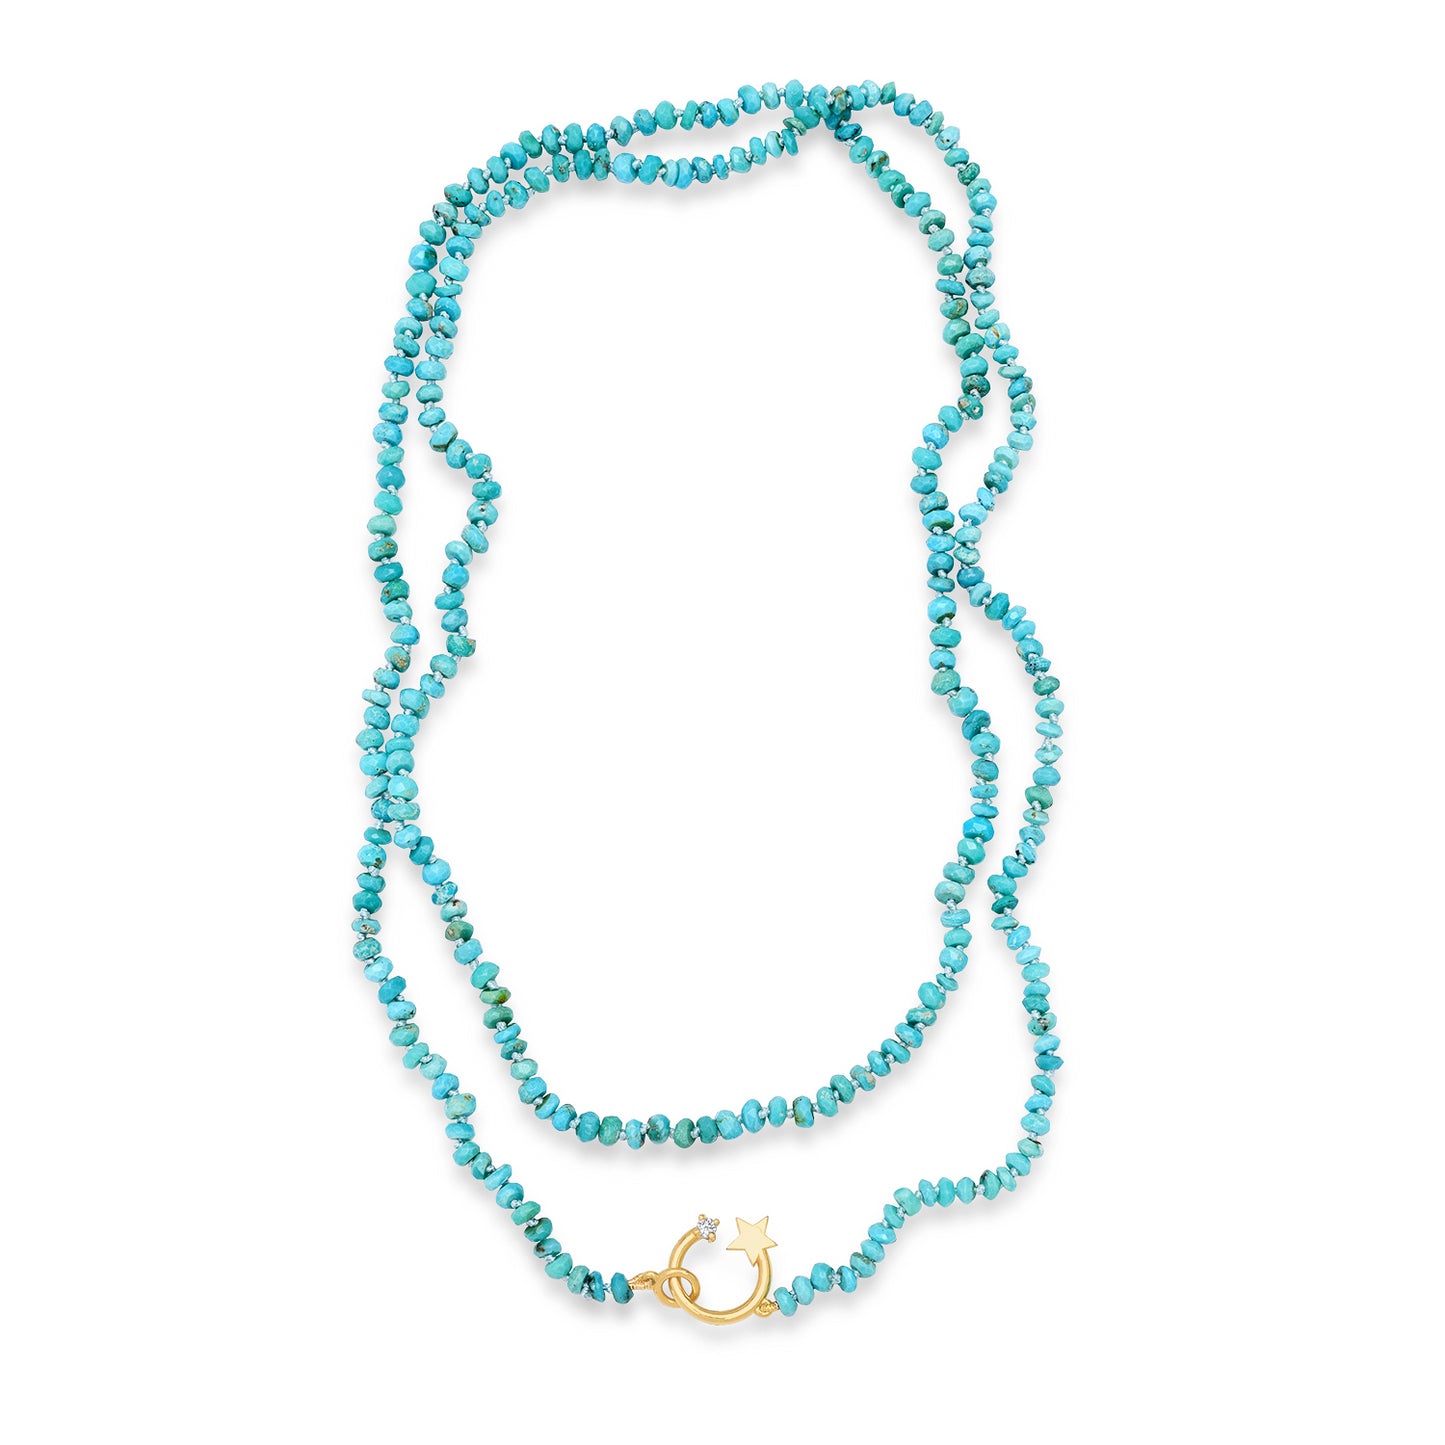 Shooting Star Turquoise Beaded Necklace